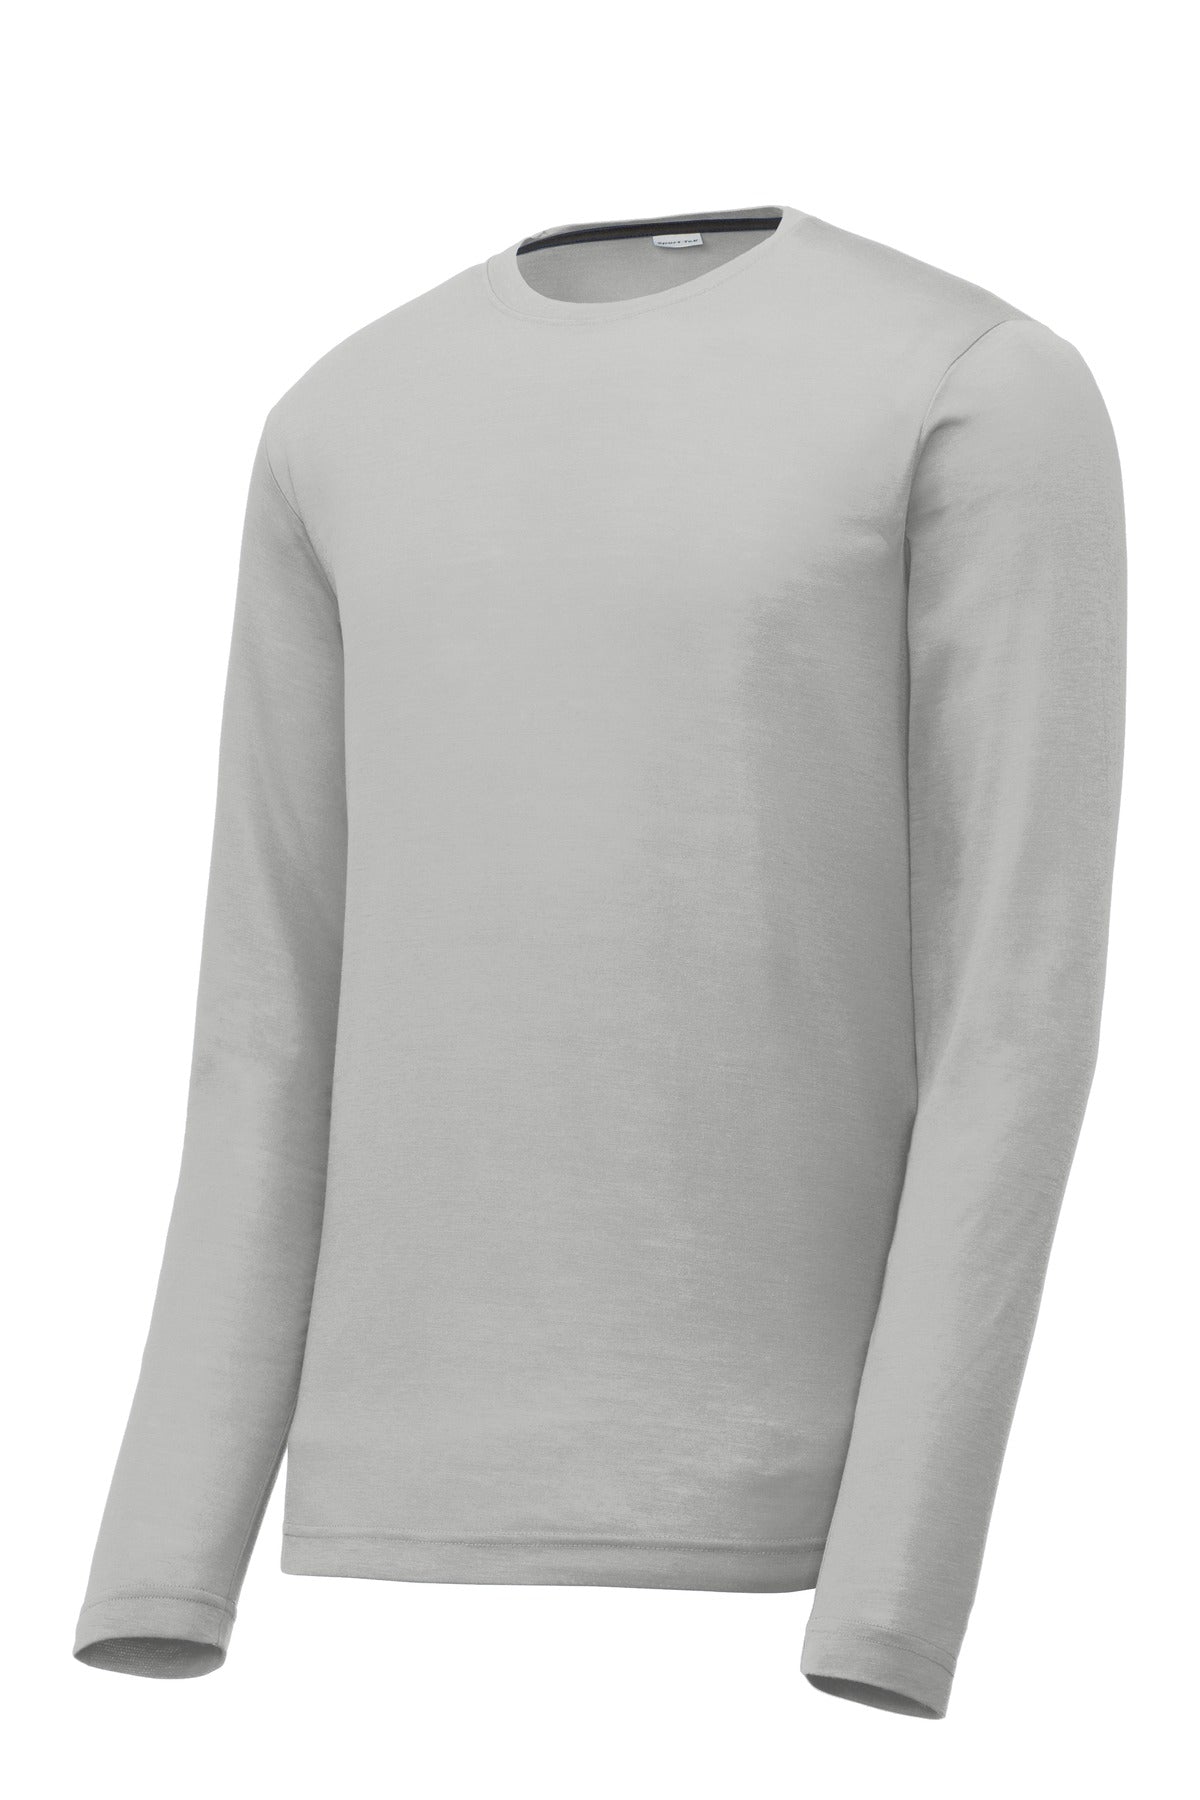 Sport-Tek Long Sleeve PosiCharge Competitor™ Cotton Touch™ Tee. ST450LS